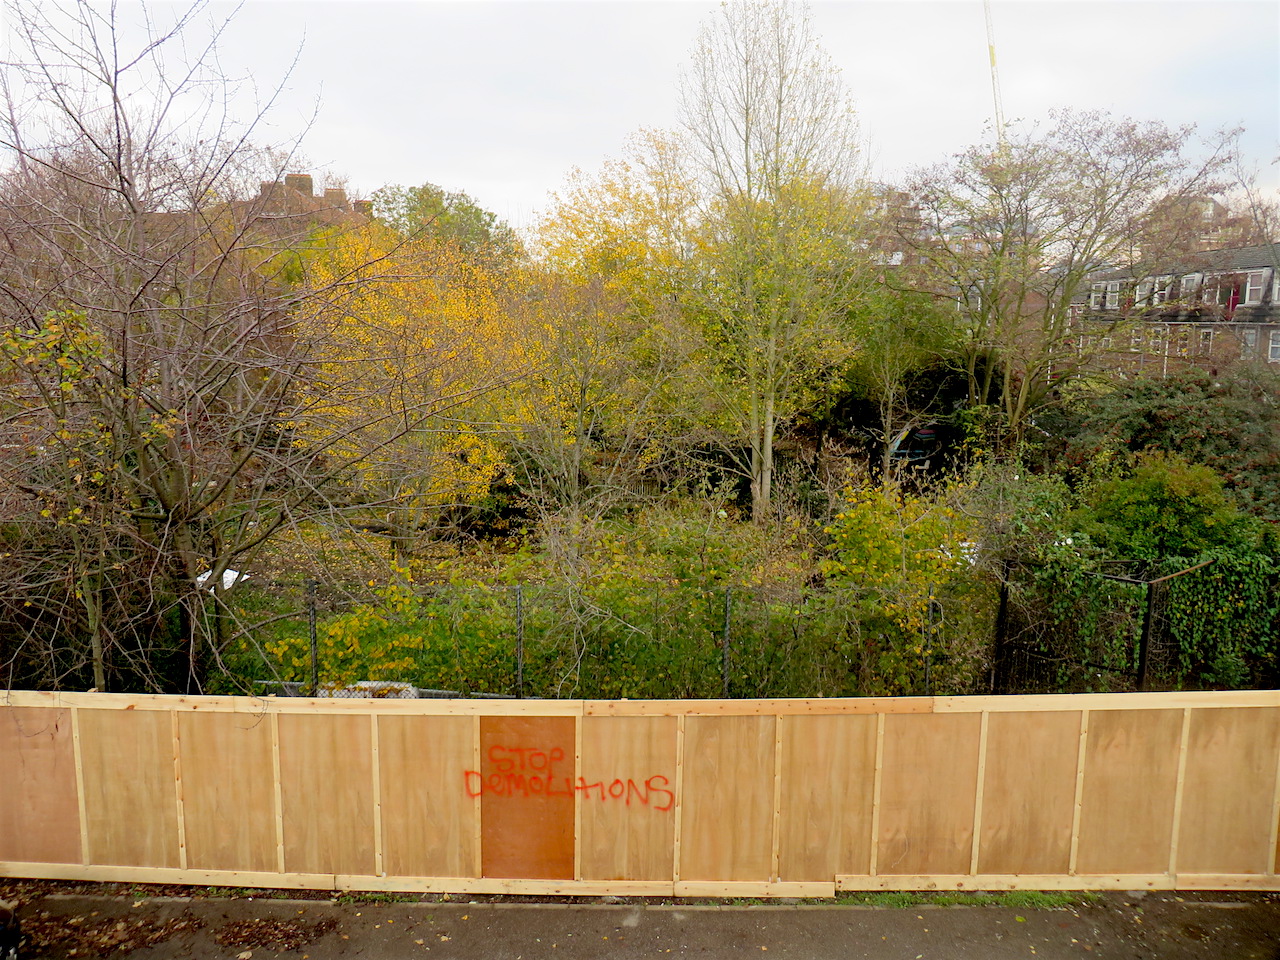 The Old Tidemill Wildlife Garden as viewed from the top balcony of Reginald House in Deptford on November 21, 2018 (Photo: Andy Worthington).